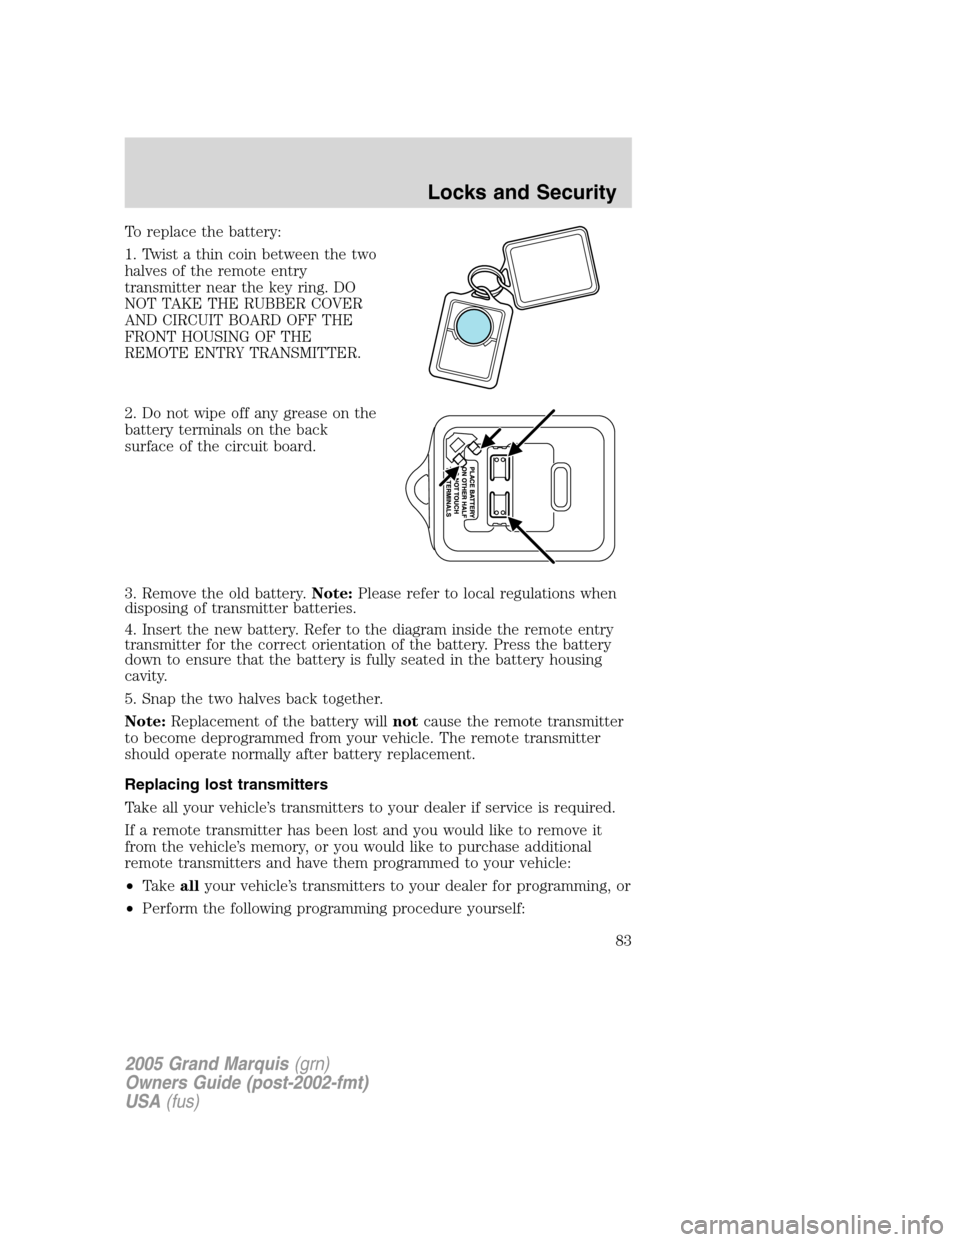 Mercury Grand Marquis 2005  Owners Manuals To replace the battery:
1. Twist a thin coin between the two
halves of the remote entry
transmitter near the key ring. DO
NOT TAKE THE RUBBER COVER
AND CIRCUIT BOARD OFF THE
FRONT HOUSING OF THE
REMOT